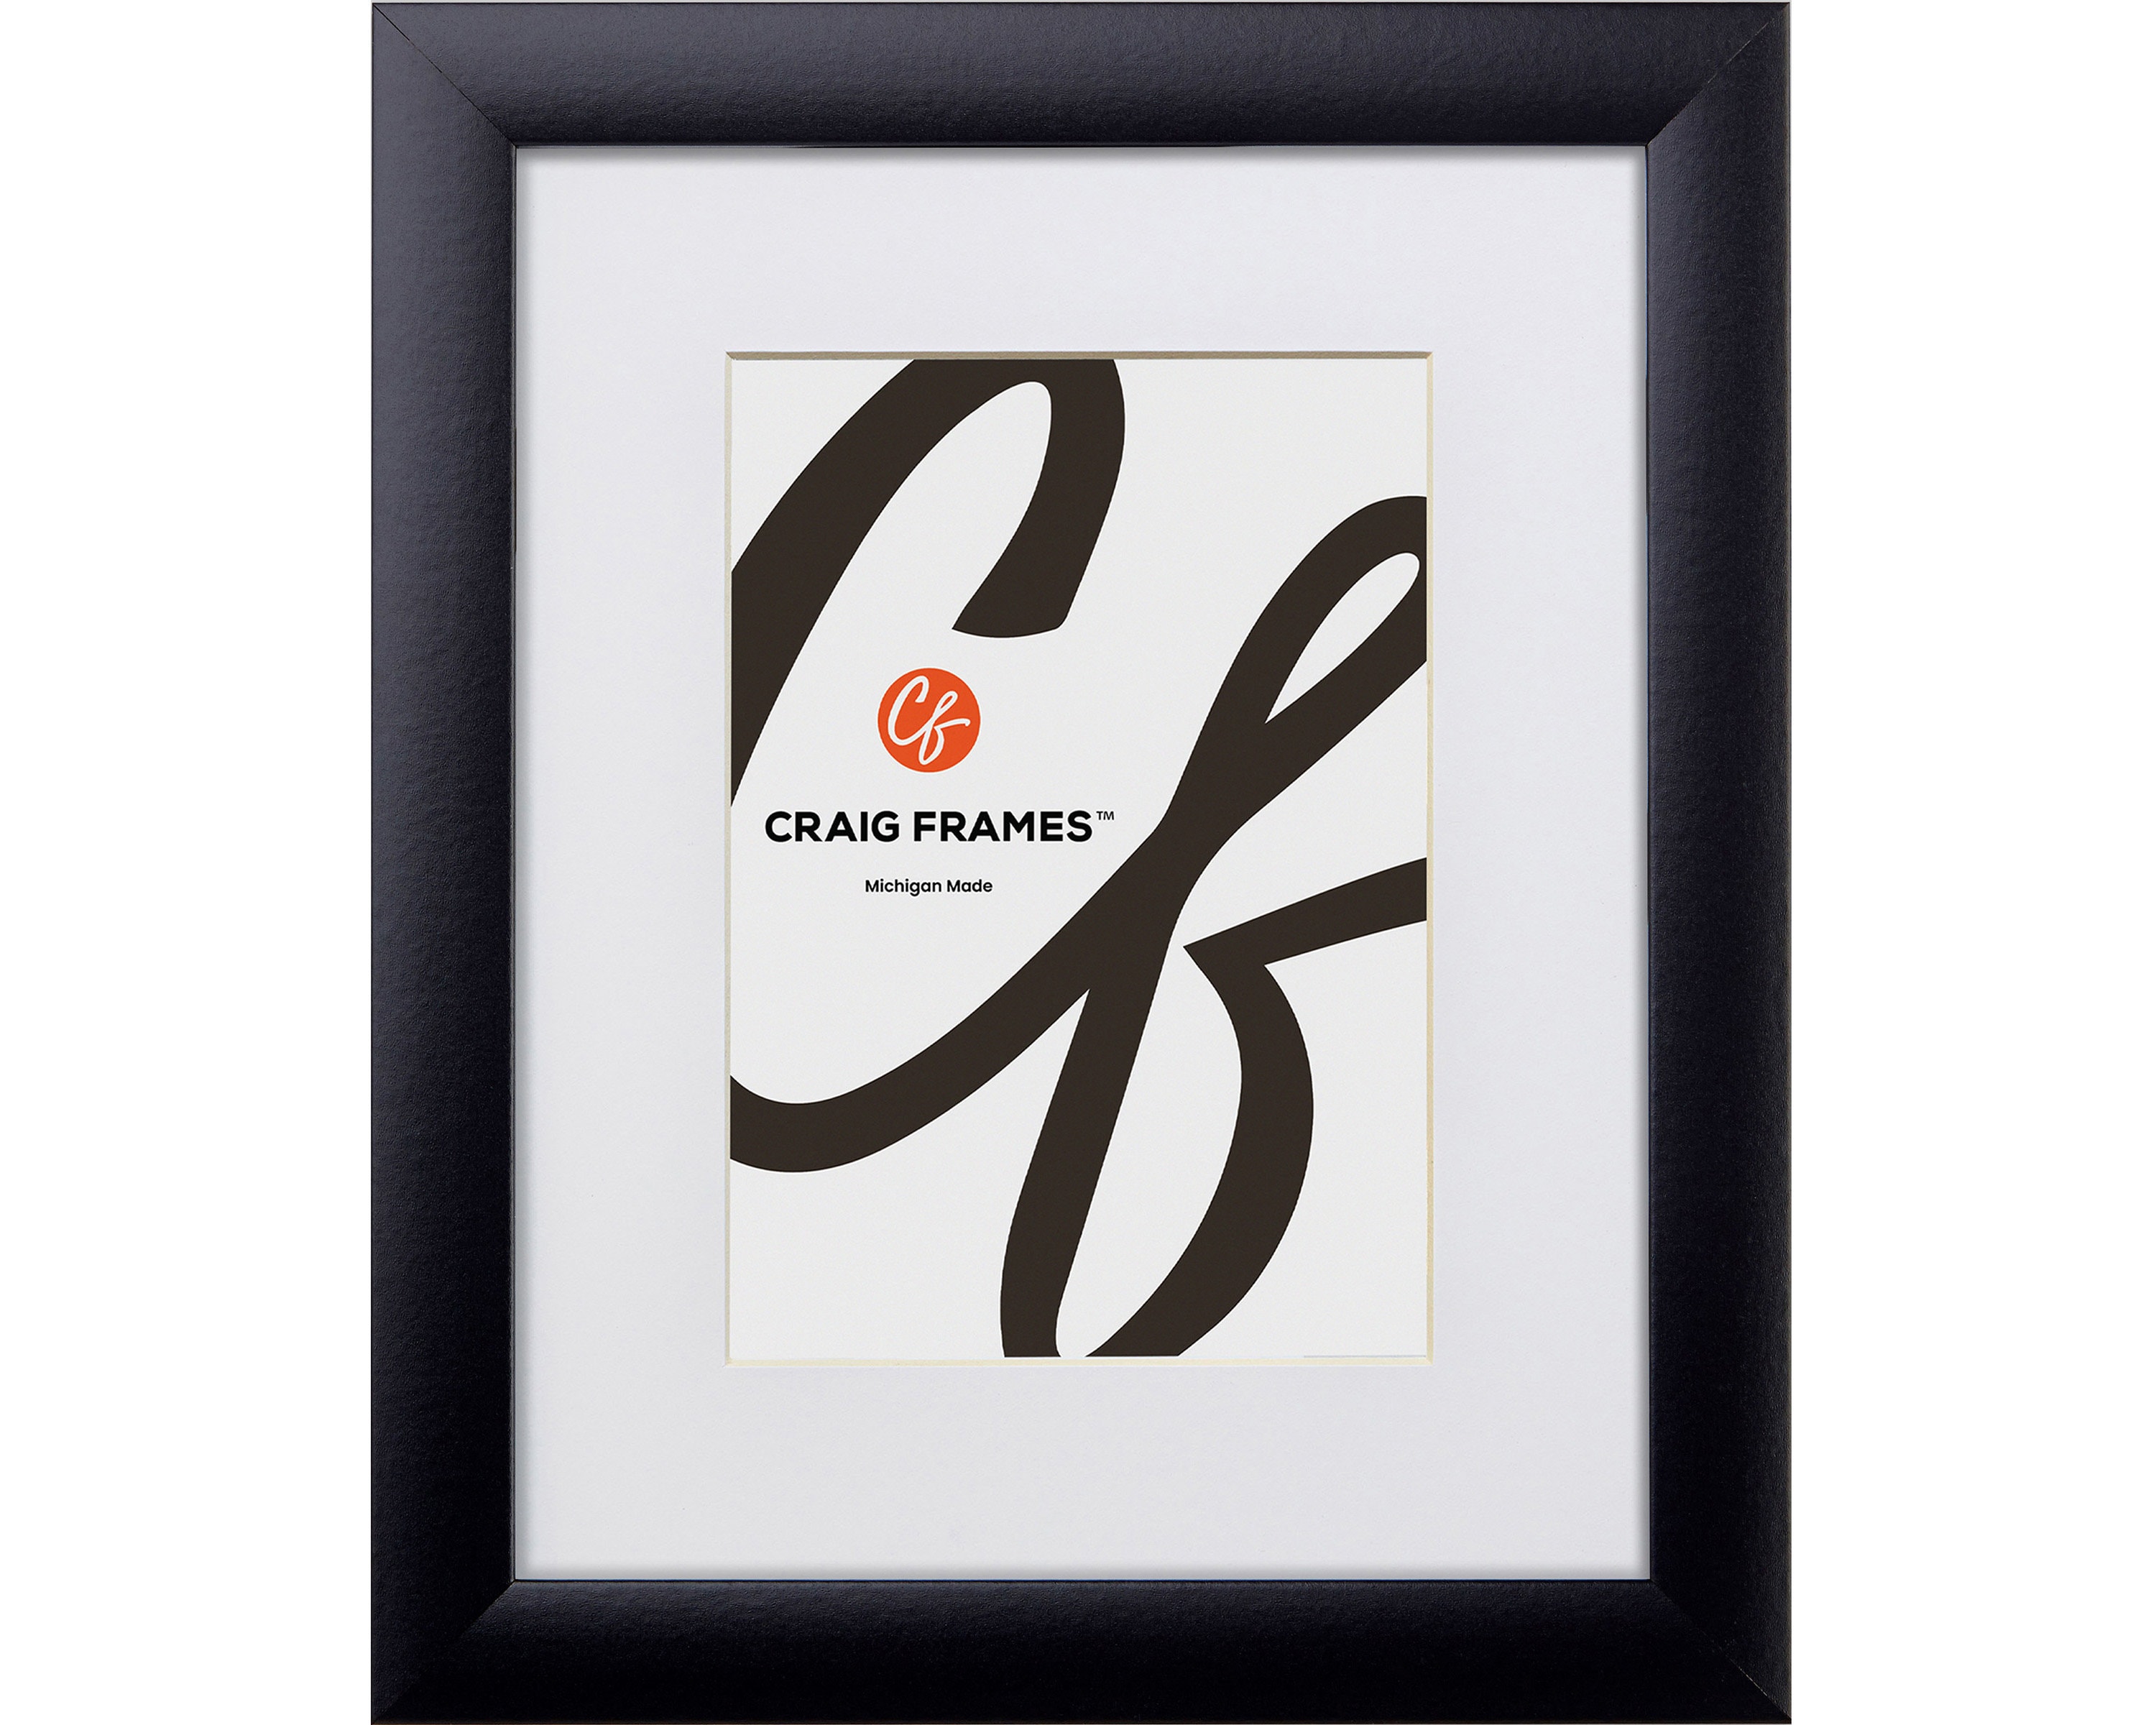 MCS Canvas Float Frame, 8 x 10 x 3/4 in, Gesso Black